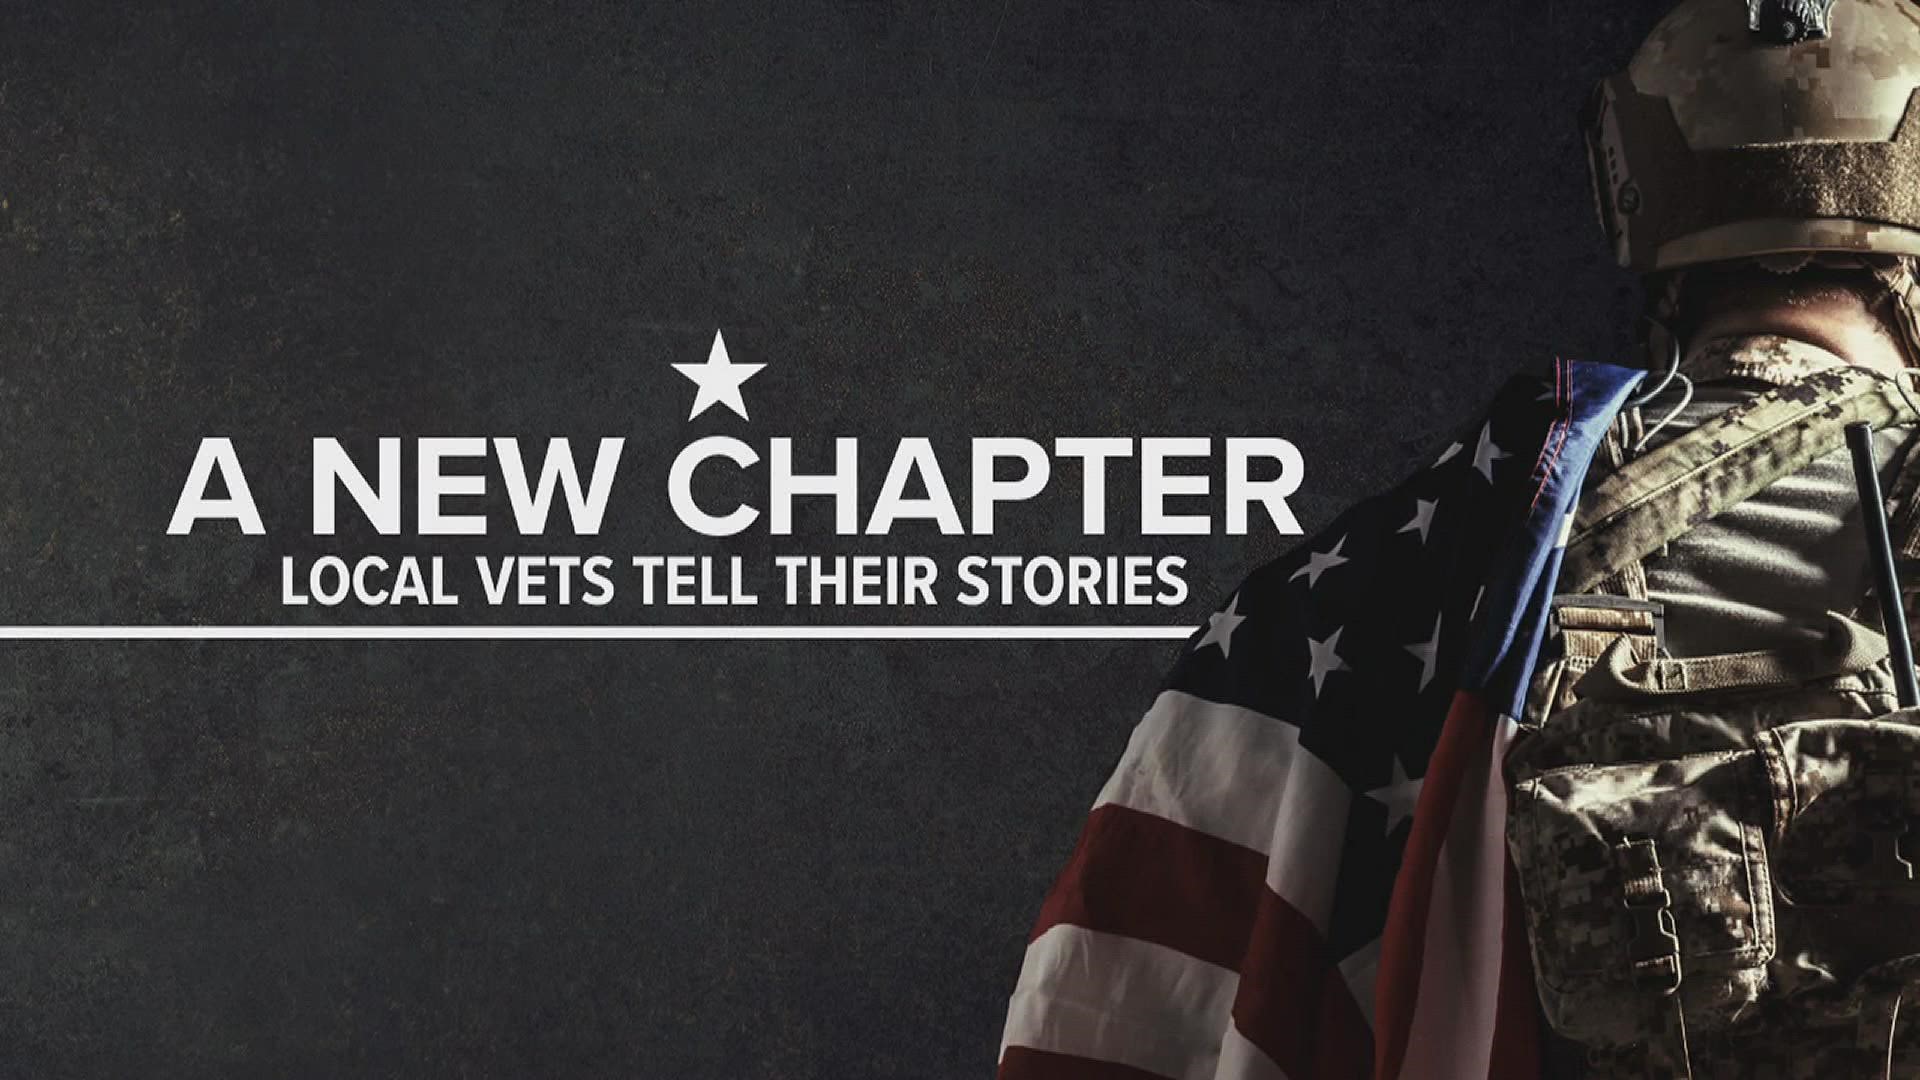 Ahead of Veterans Day this Friday, FOX43 is highlighting local veterans and their life after service.